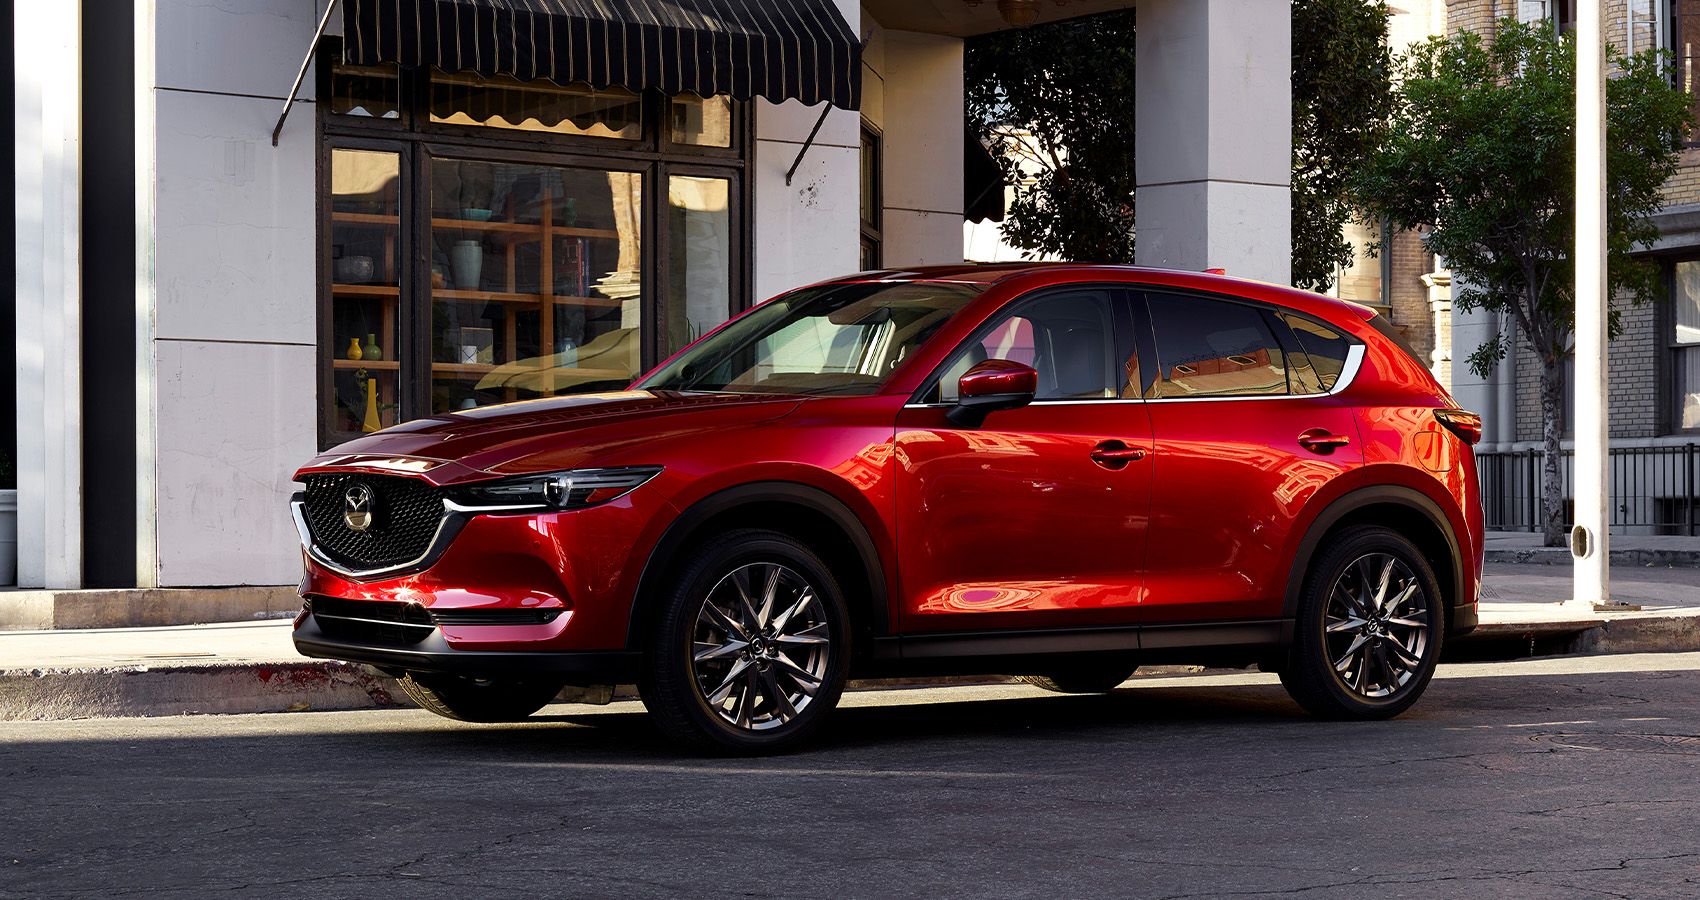 Here is Why The Mazda CX-5 Is The Finest Japanese Compact SUV Of 2021